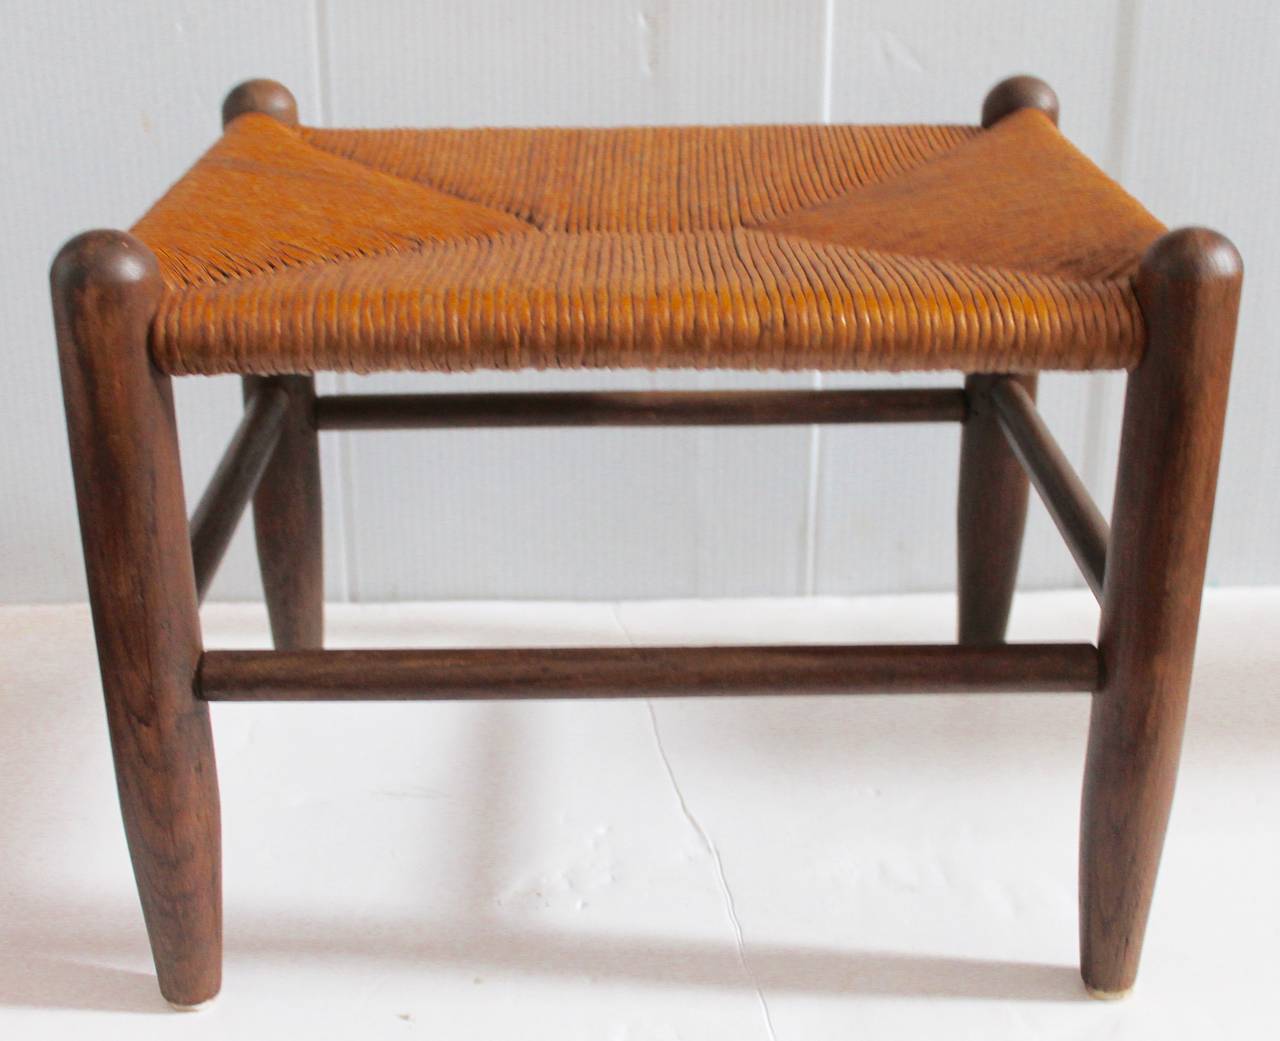 American Early 20th Century Handmade Stool with Woven Rattan Seat